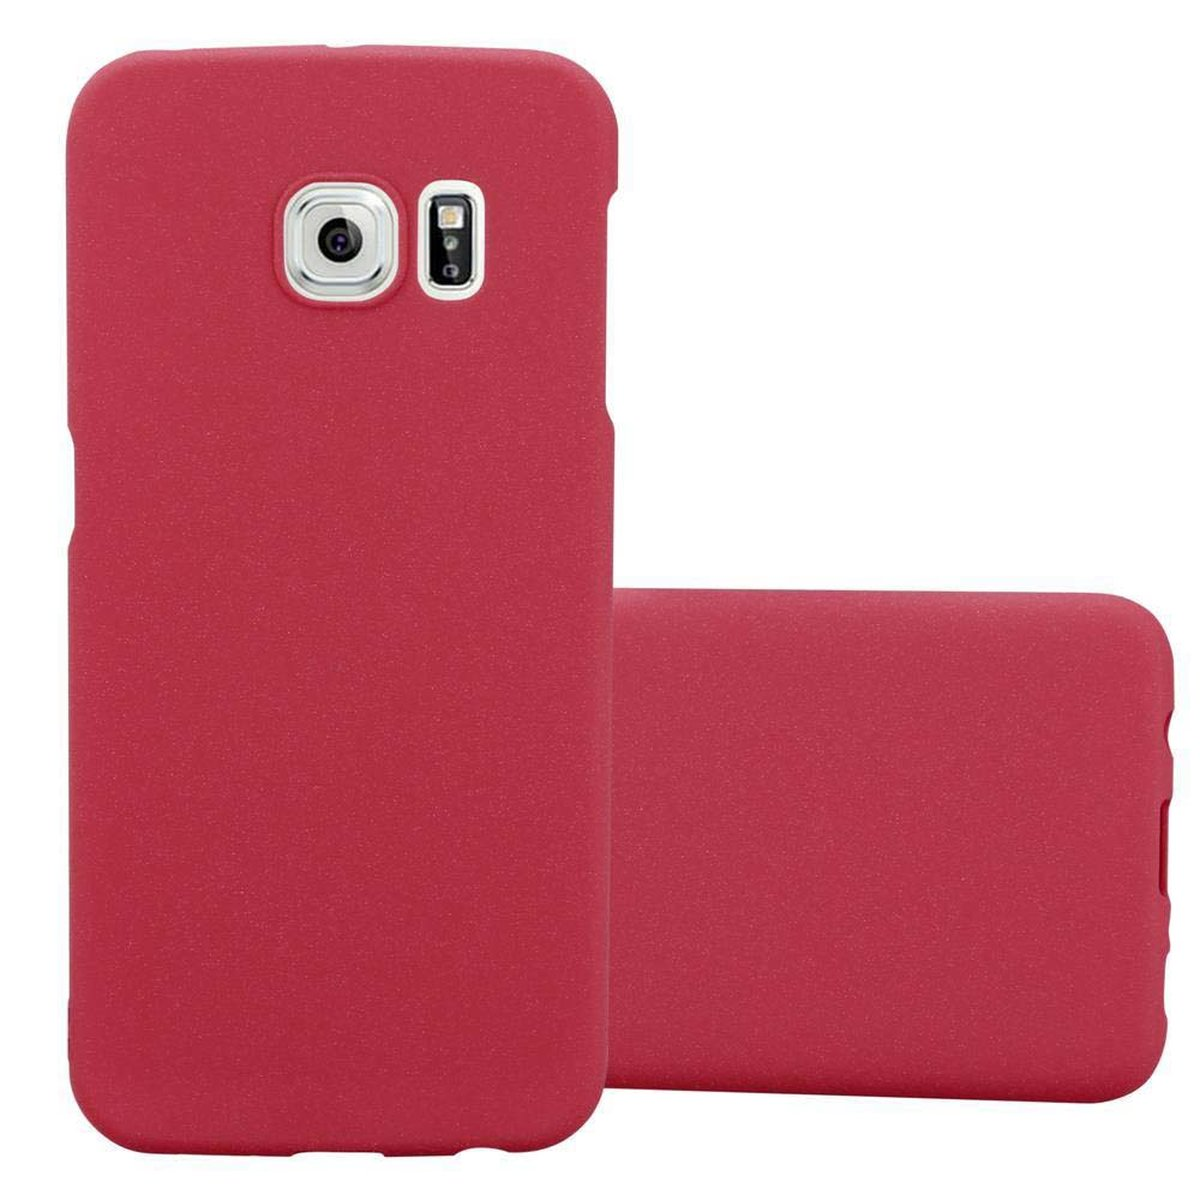 Backcover, FROSTY PLUS, CADORABO Galaxy Case Style, ROT im Hard Samsung, EDGE Frosty S6 Hülle